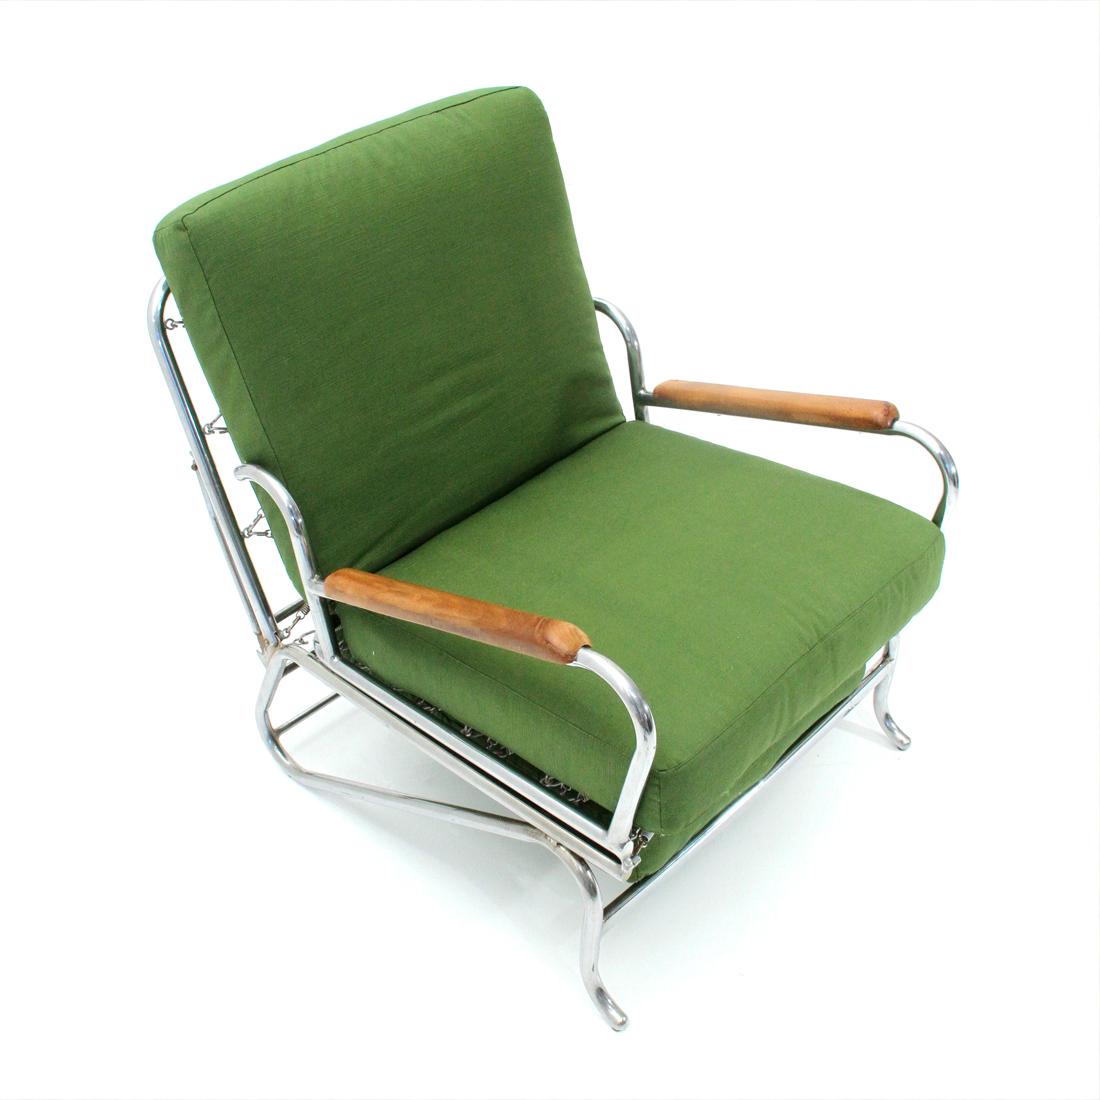 Italian manufacturing armchair produced in the 1930s.
Chromed metal tubular structure.
Cushions padded and lined with new green fabric.
Armrests in shaped wood.
Adjustable backrest in different positions and armchair that can be transformed into